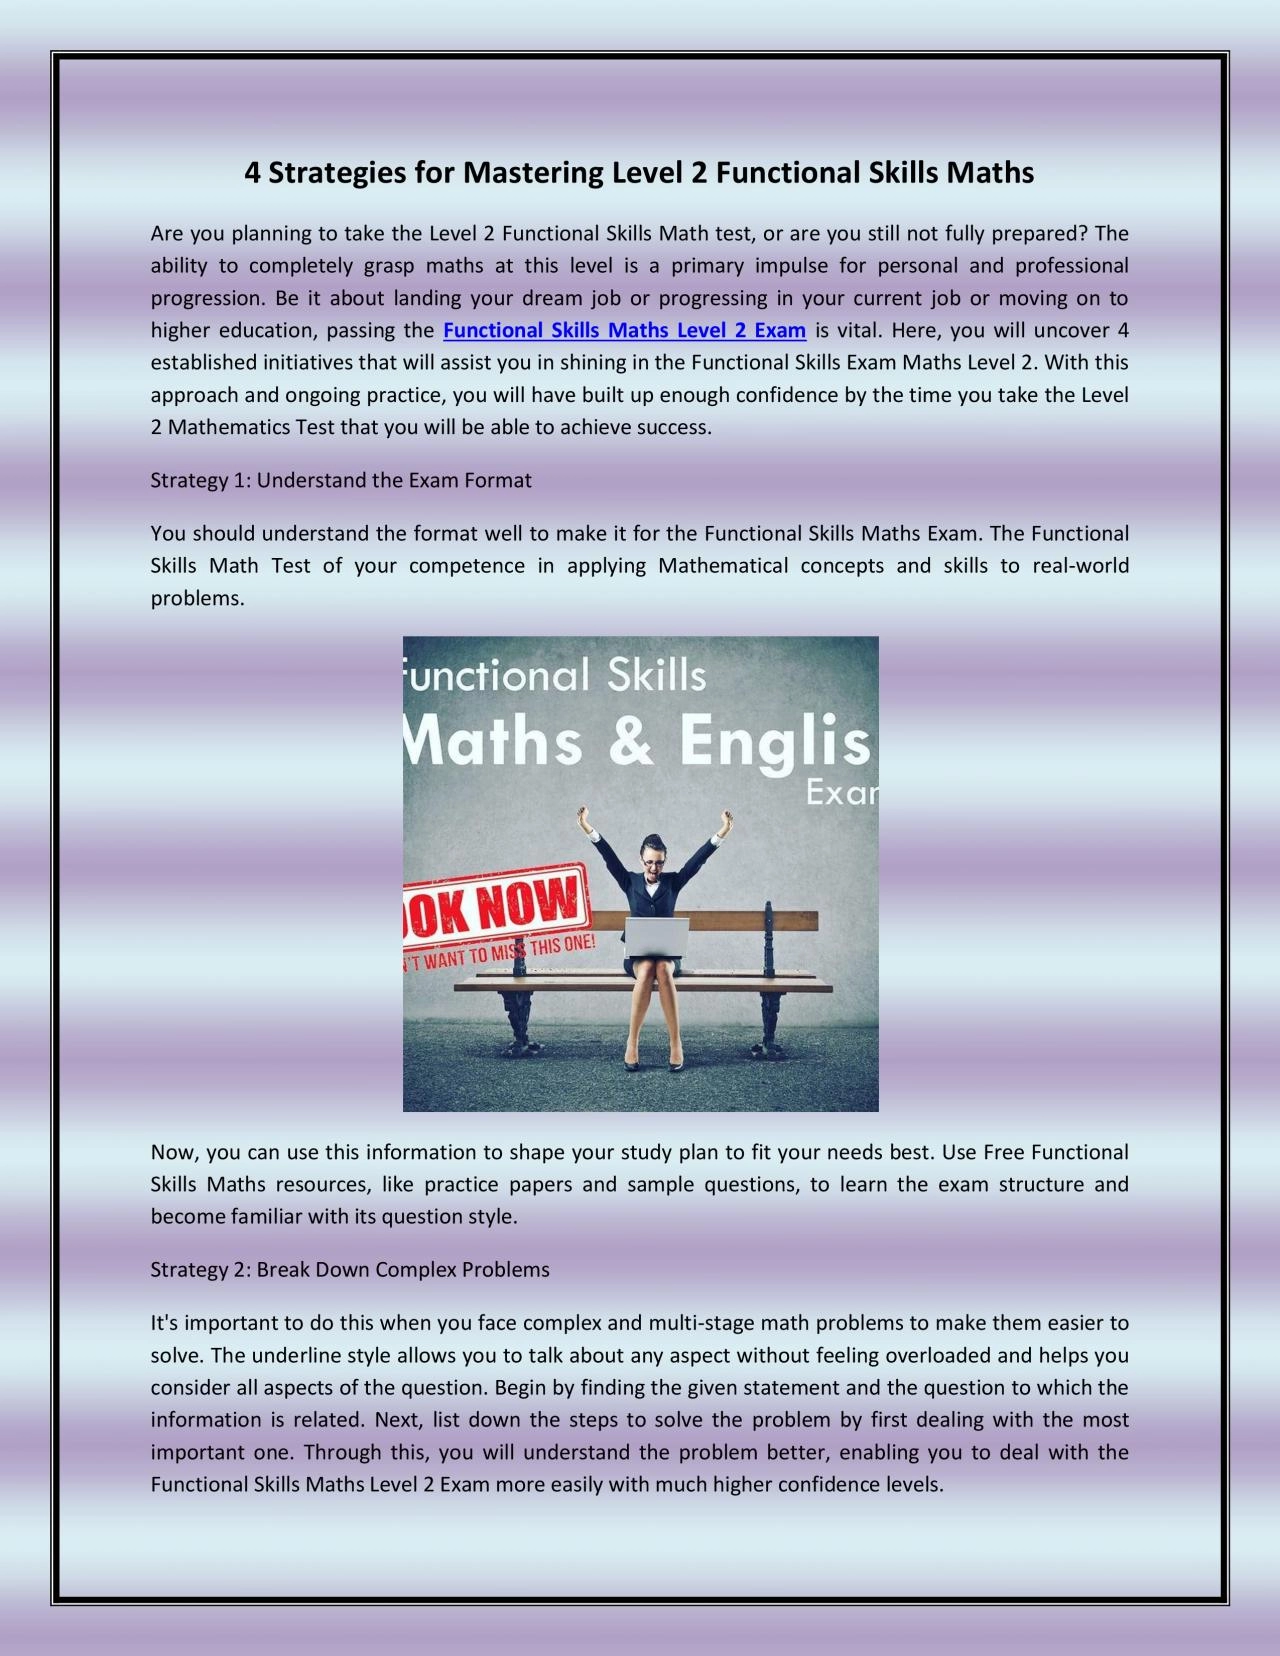 4 Strategies for Mastering Level 2 Functional Skills Maths